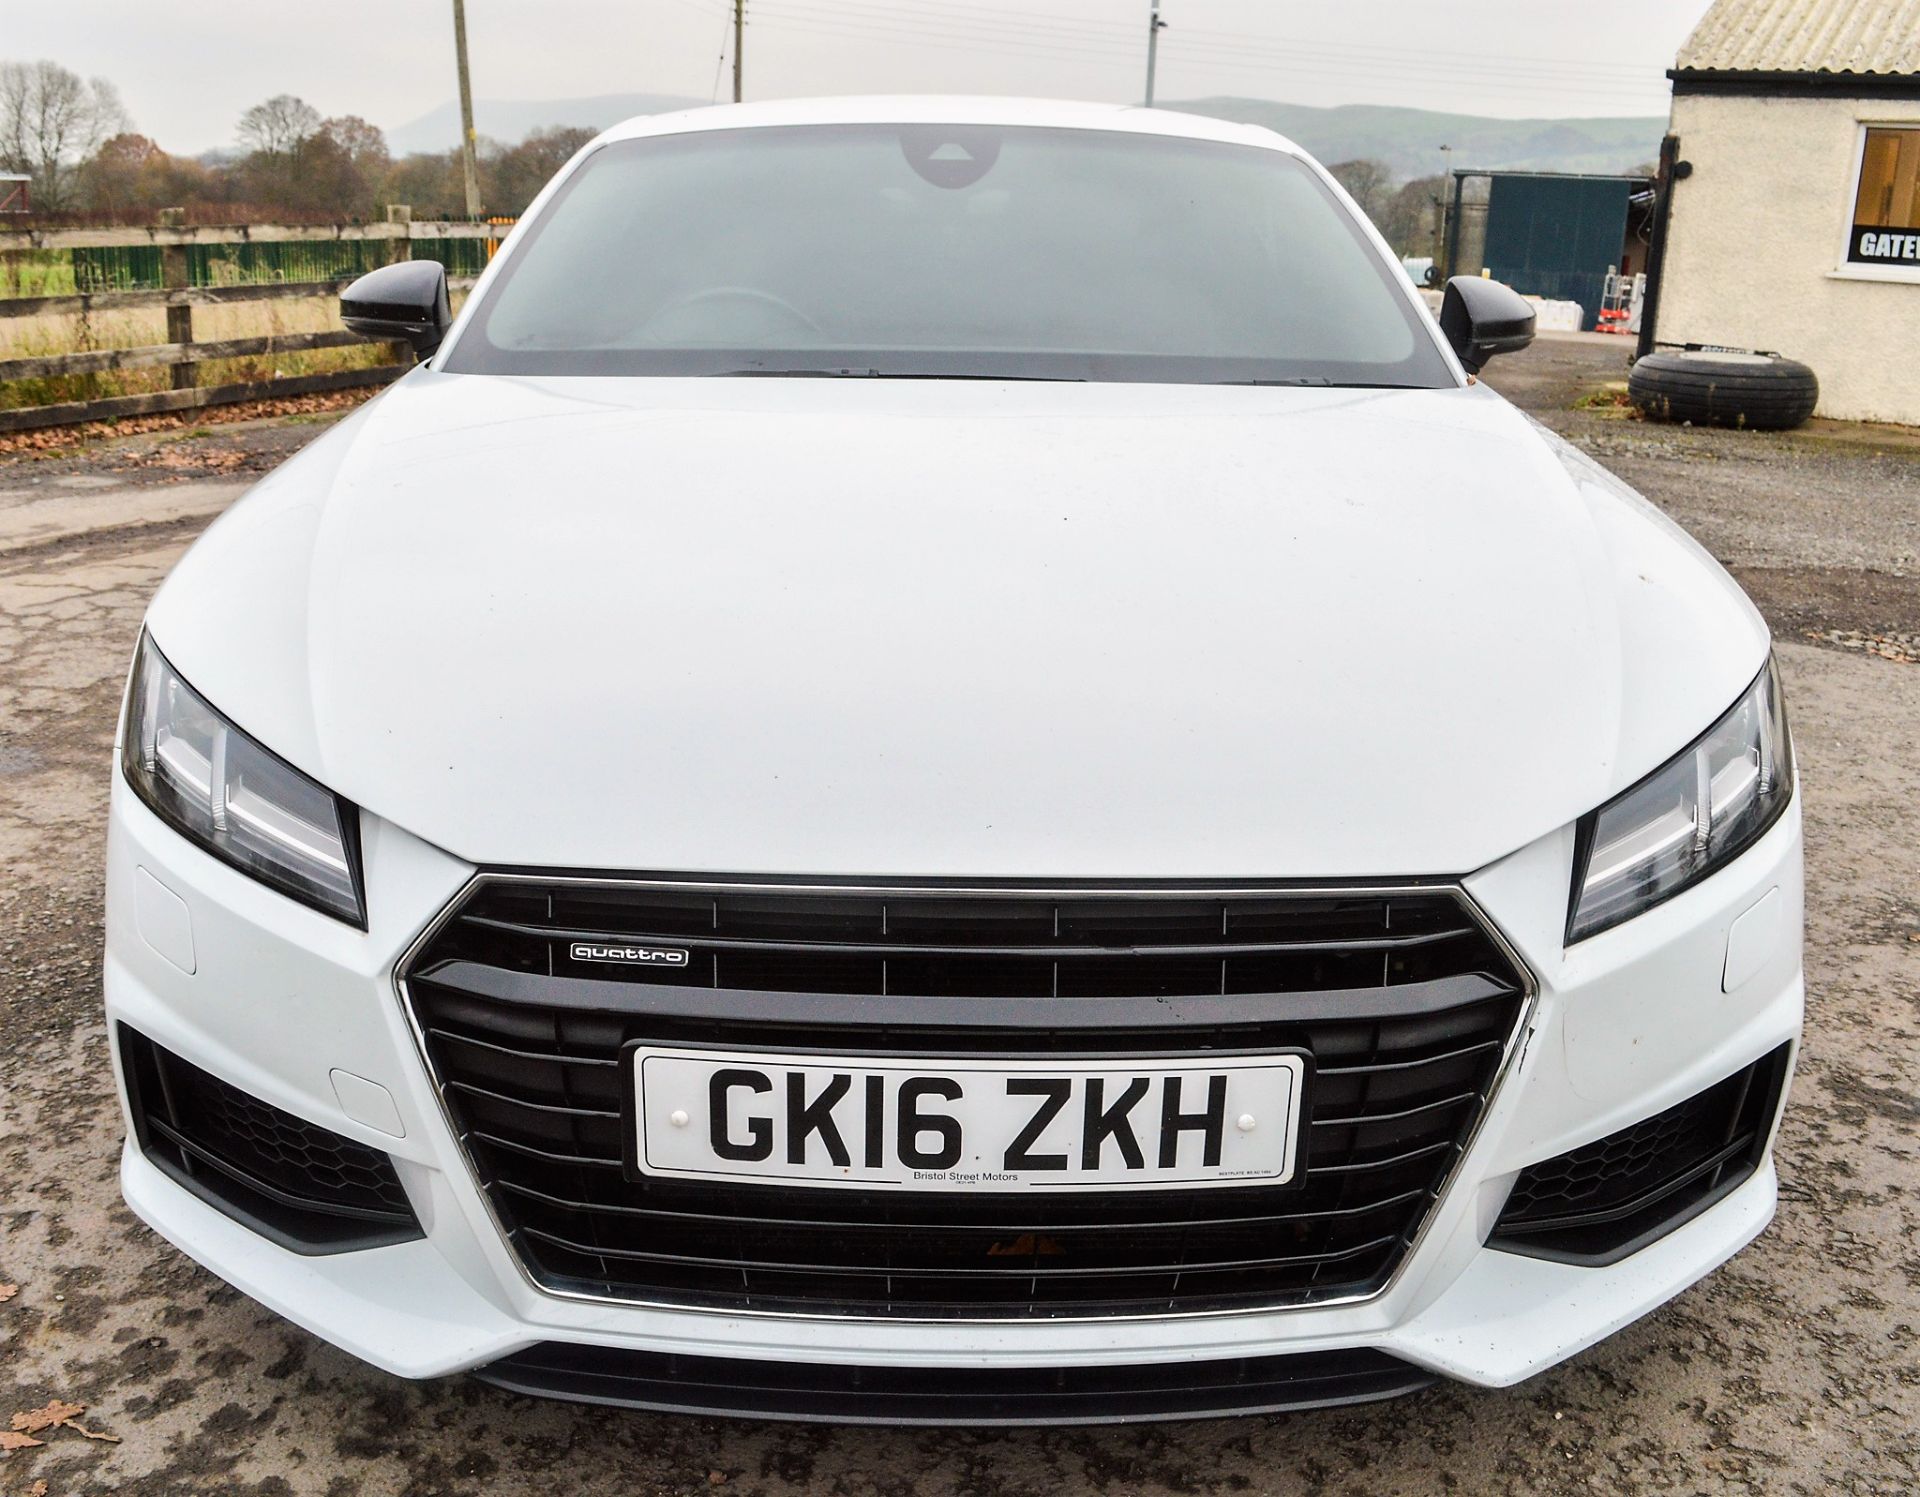 Audi TT TFSi Quattro S-Line 2 litre petrol automatic coupe car Registration Number: GK16 ZKH Date of - Image 5 of 10